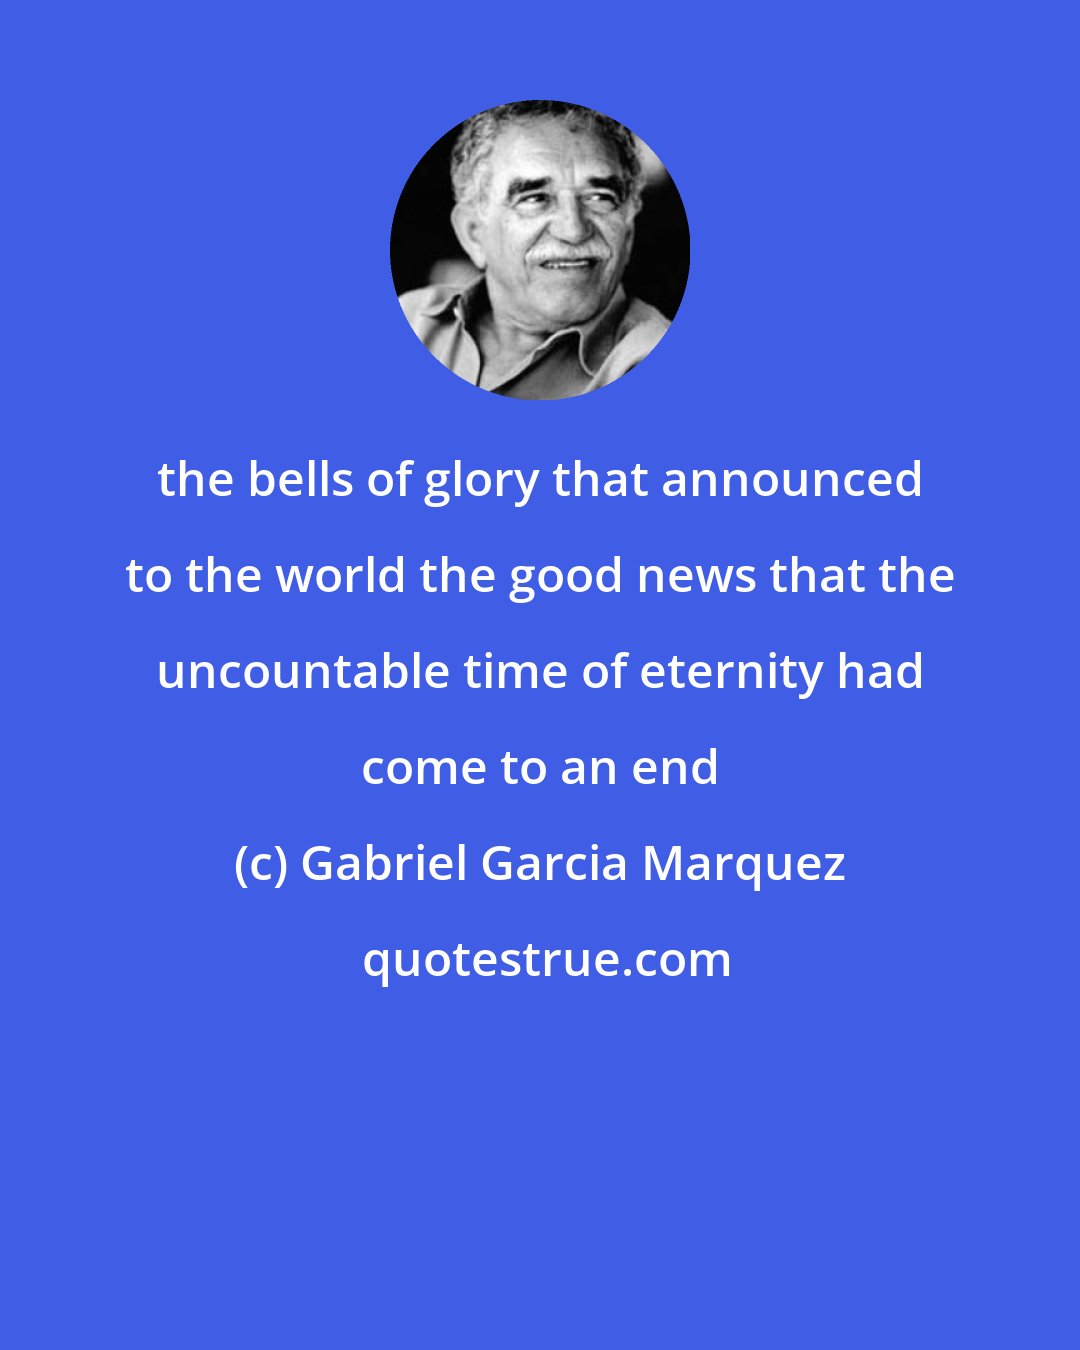 Gabriel Garcia Marquez: the bells of glory that announced to the world the good news that the uncountable time of eternity had come to an end